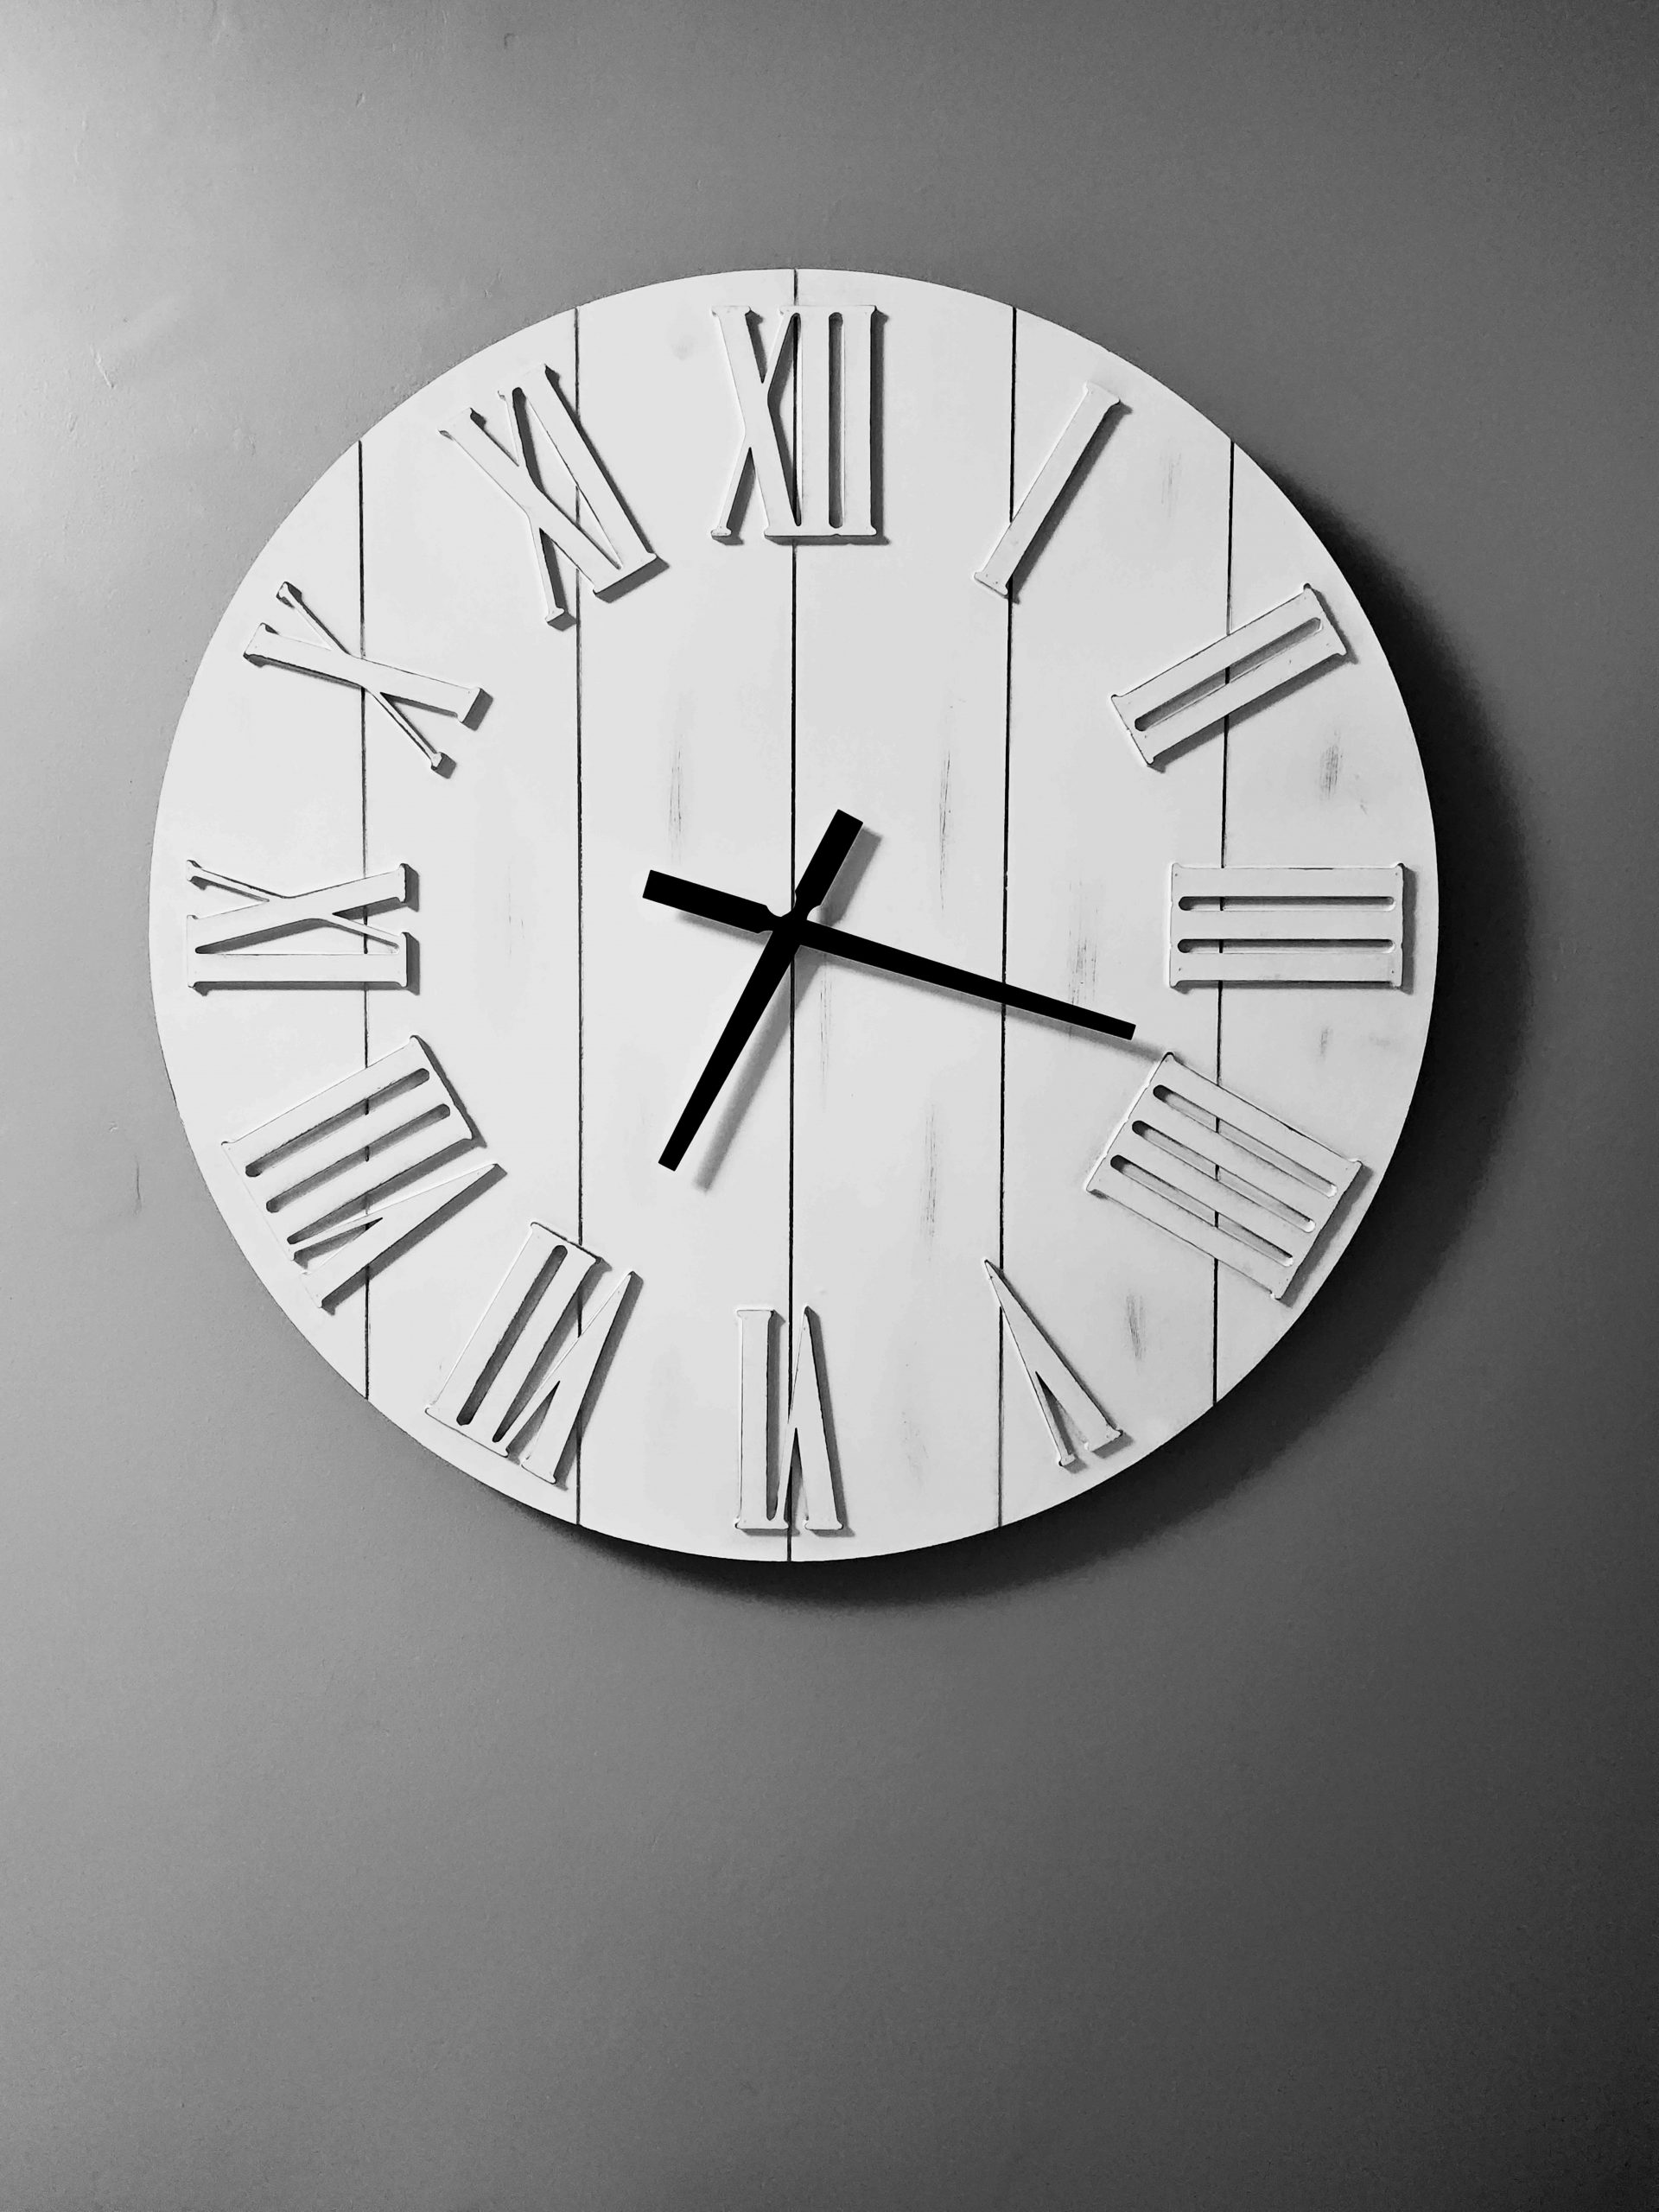 Black and white image of Roman numeral clock on contrasting background